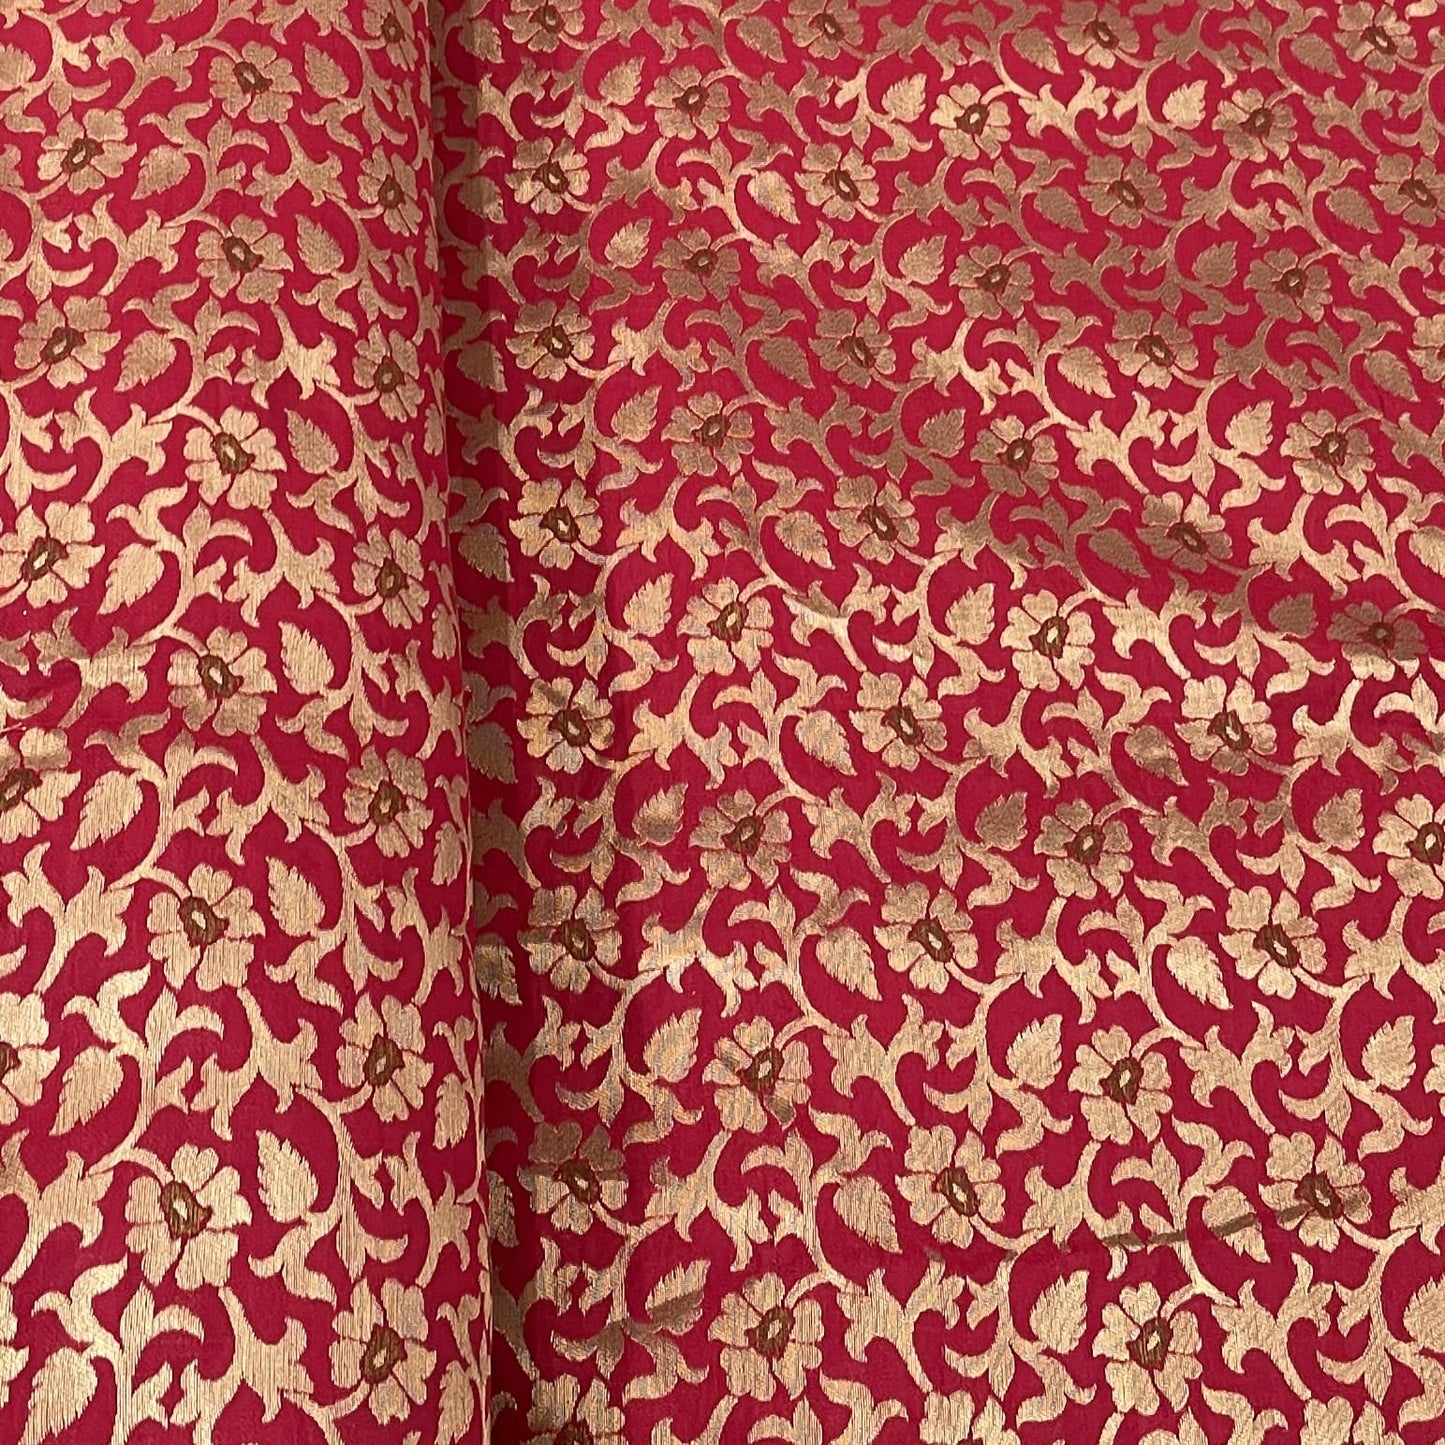 Classic Red Golden Floral Brocade Jacquard Fabric